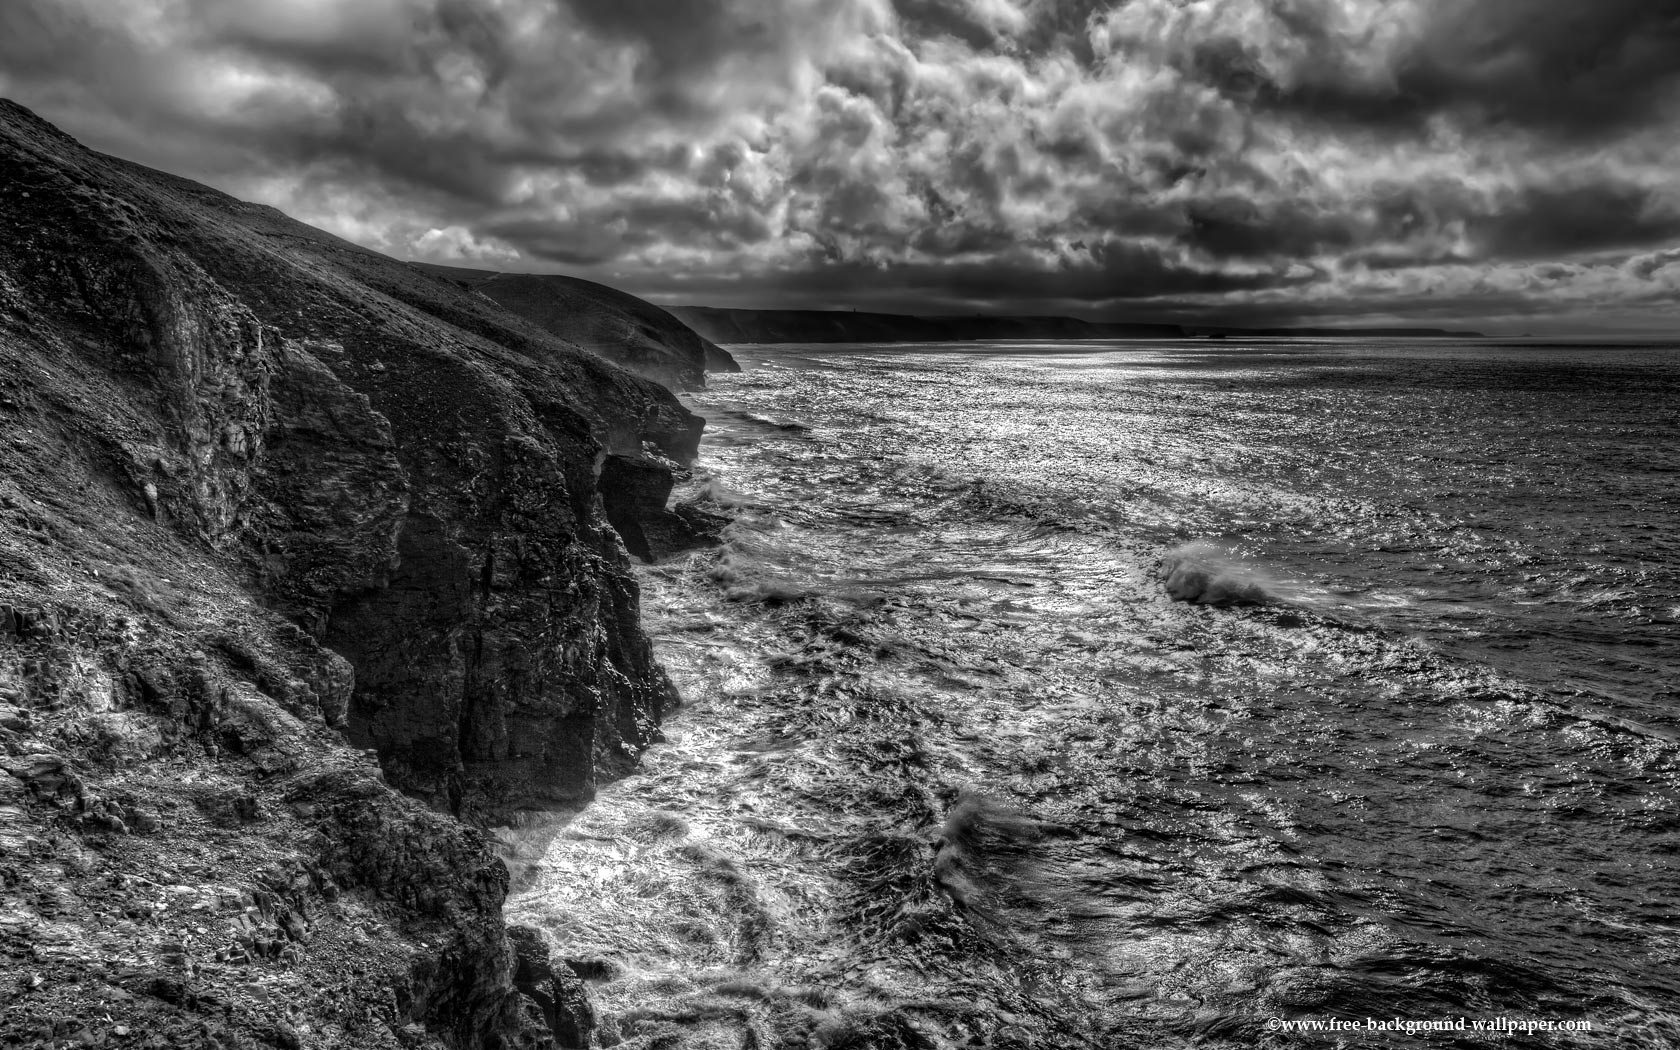 Black And White Landscape Picture Of The Cliffs Near St Agnes Head In